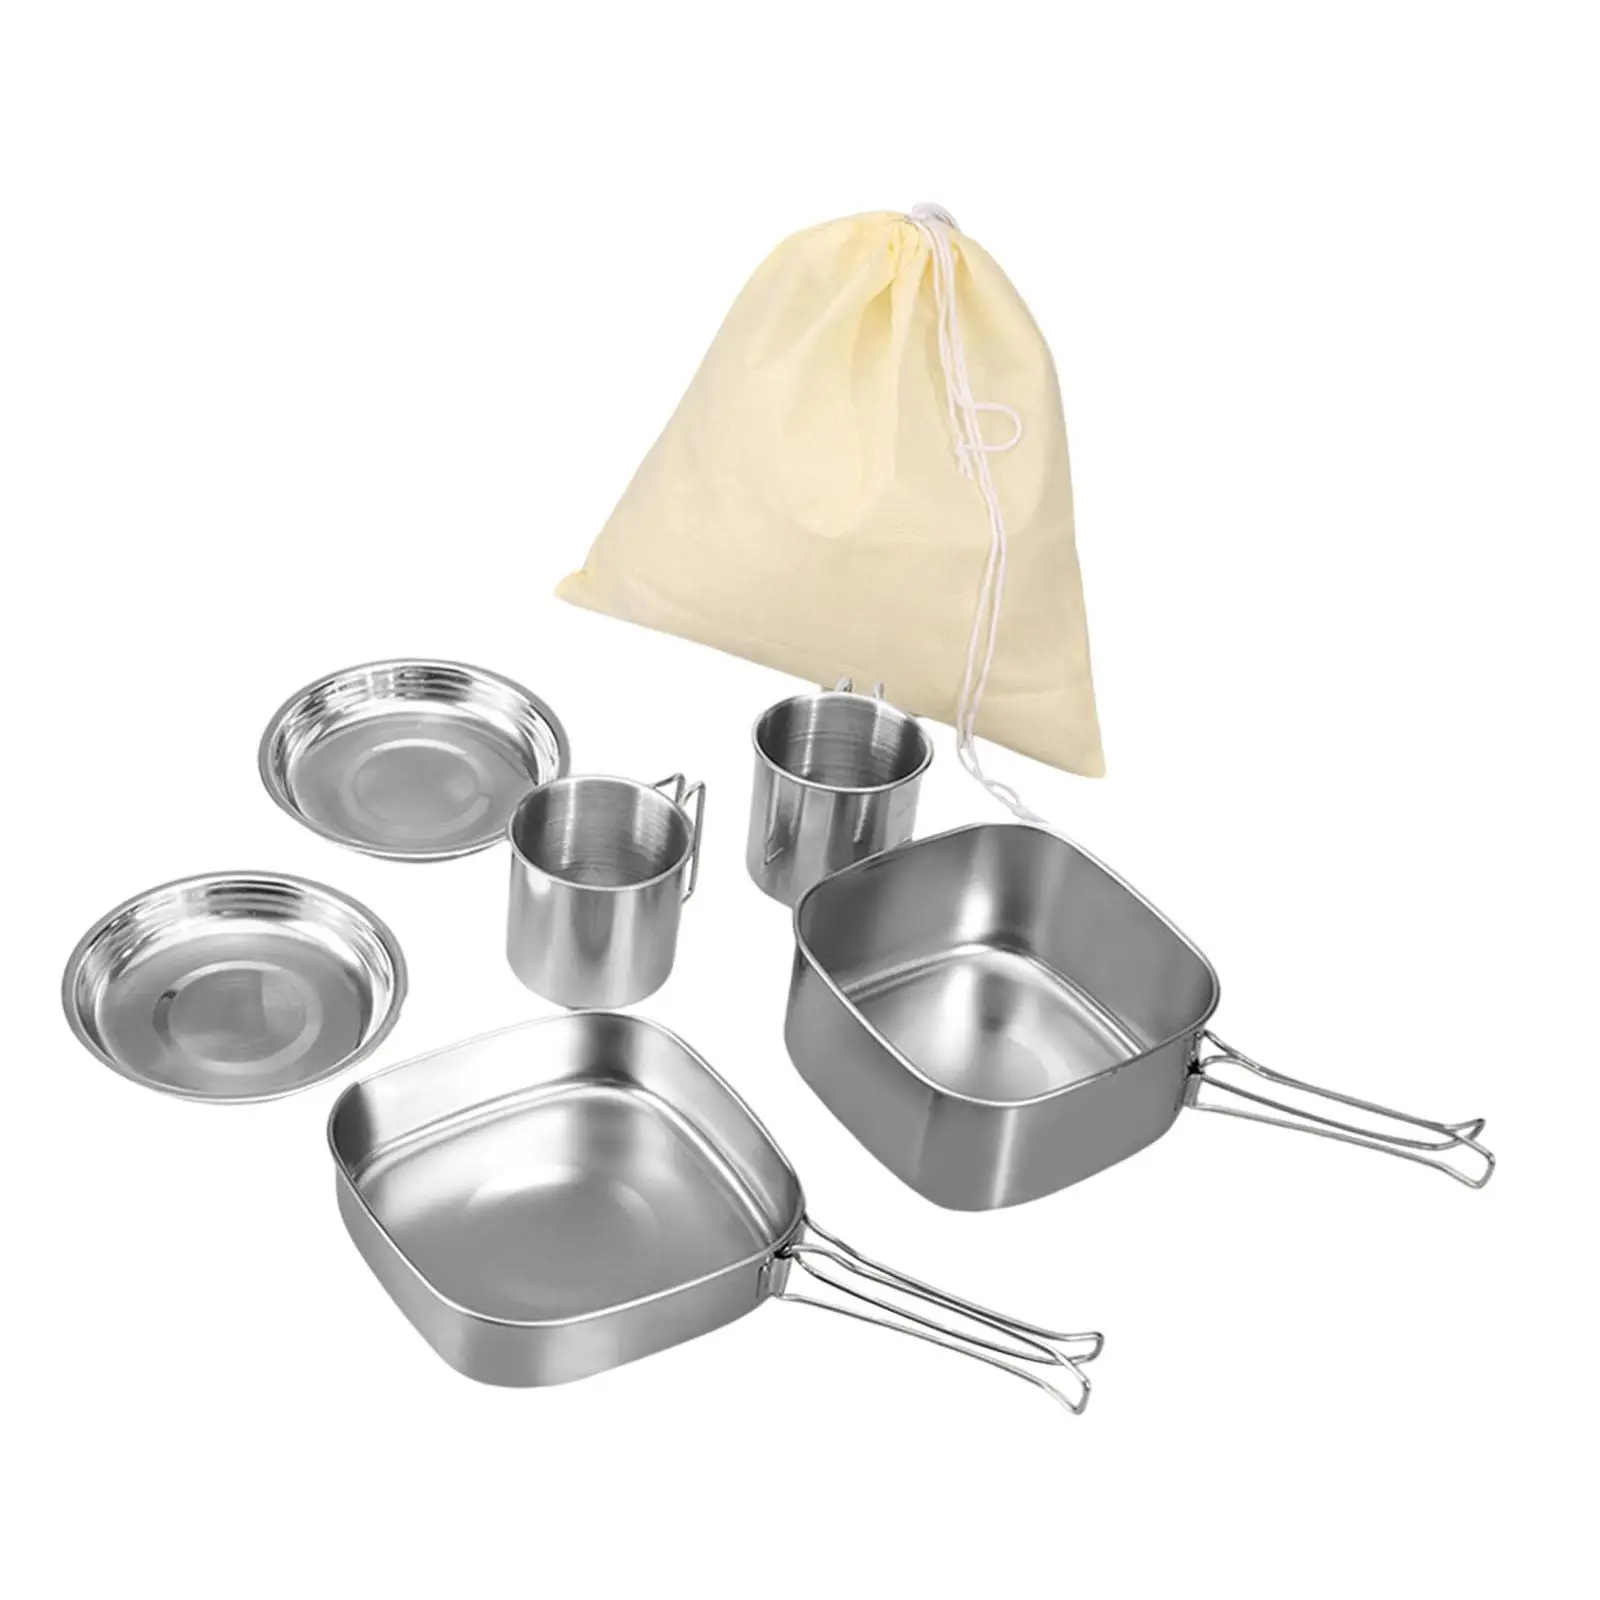 Camp Cookware Party Portable Traveling Stainless Steel Outdoor Camp Mess Kit